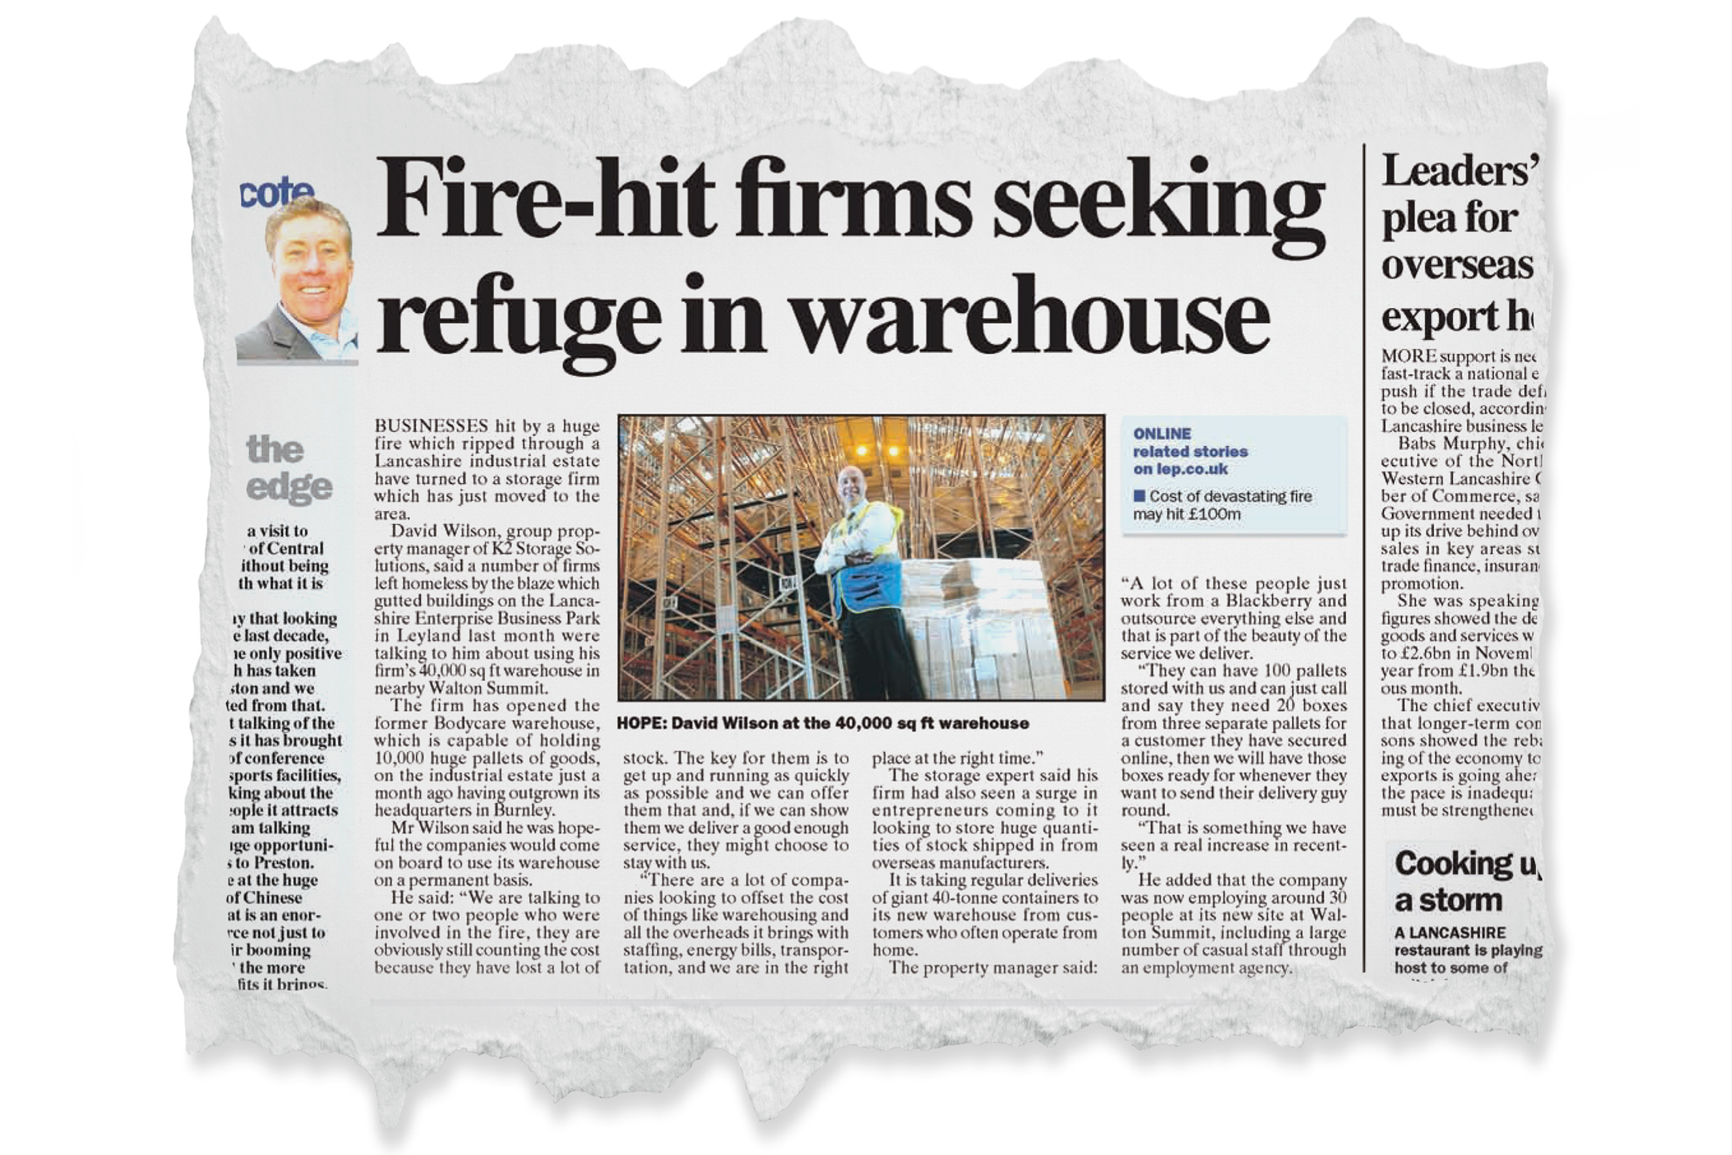 Fire-hit Firms Seeking Refuge at K2 Storage Solutions